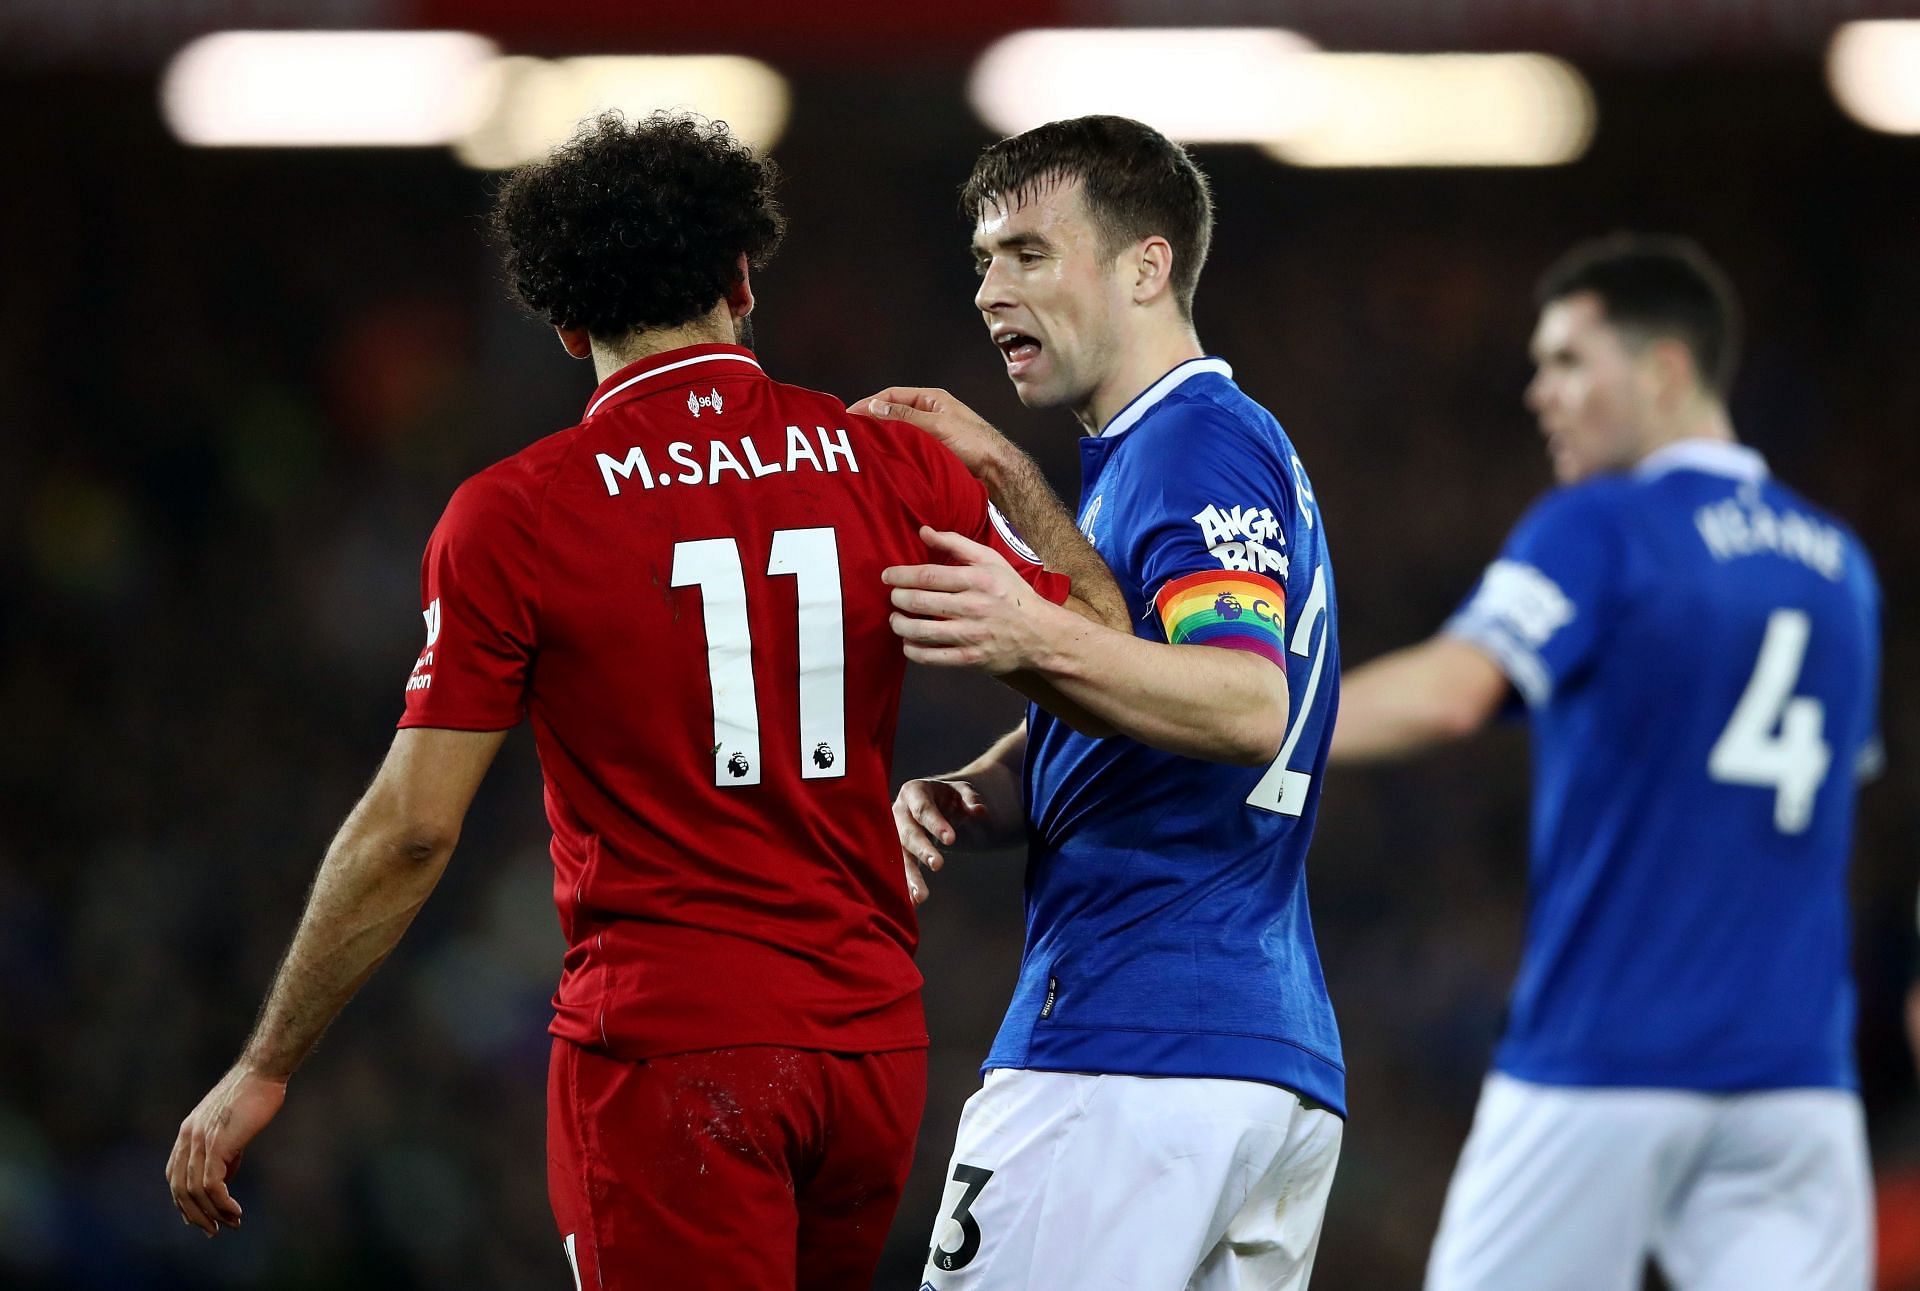 Liverpool take on Everton this weekend